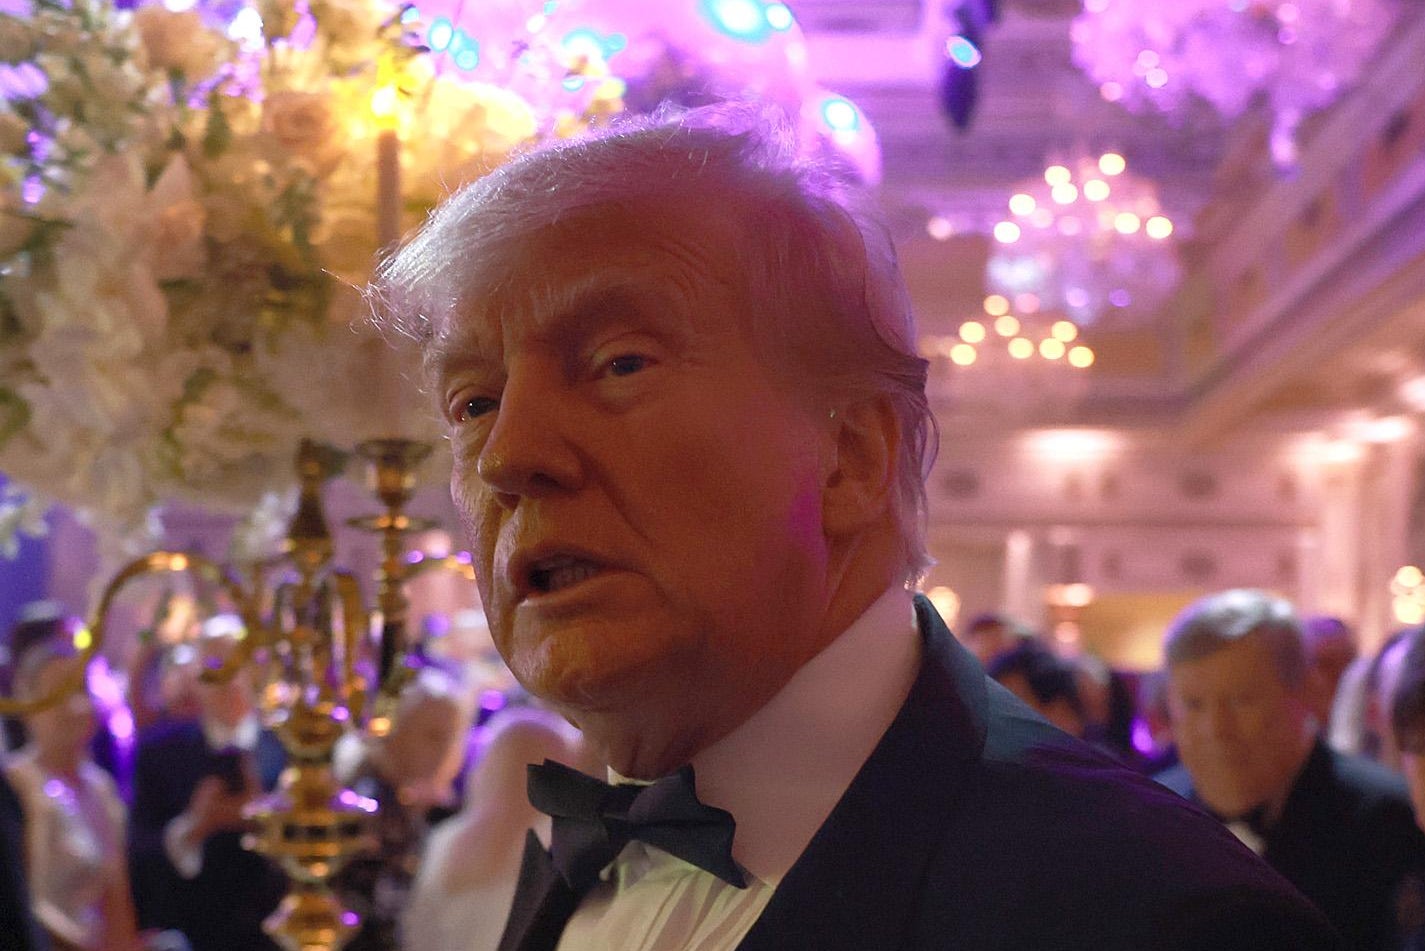 Trump in a tuxedo at a party in Mar-a-Lago